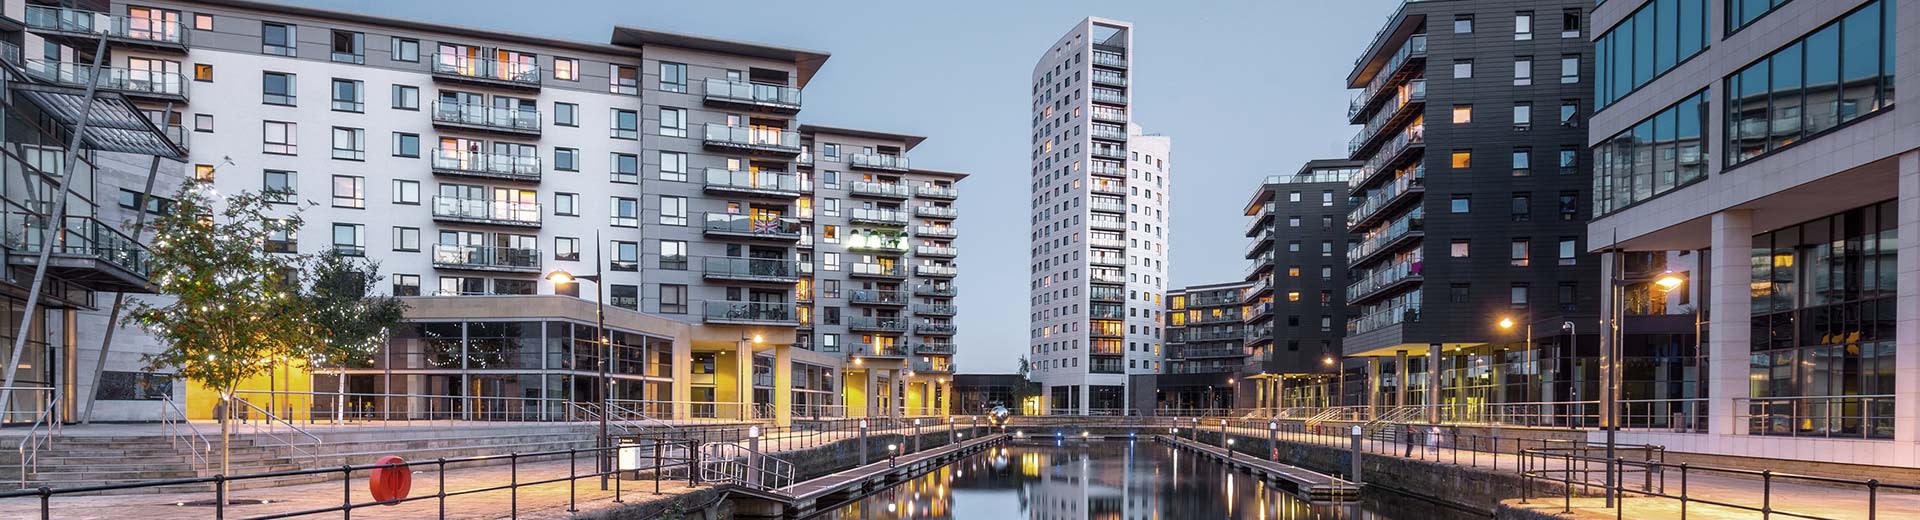 Modern residential buildings next to a canal in Leeds.